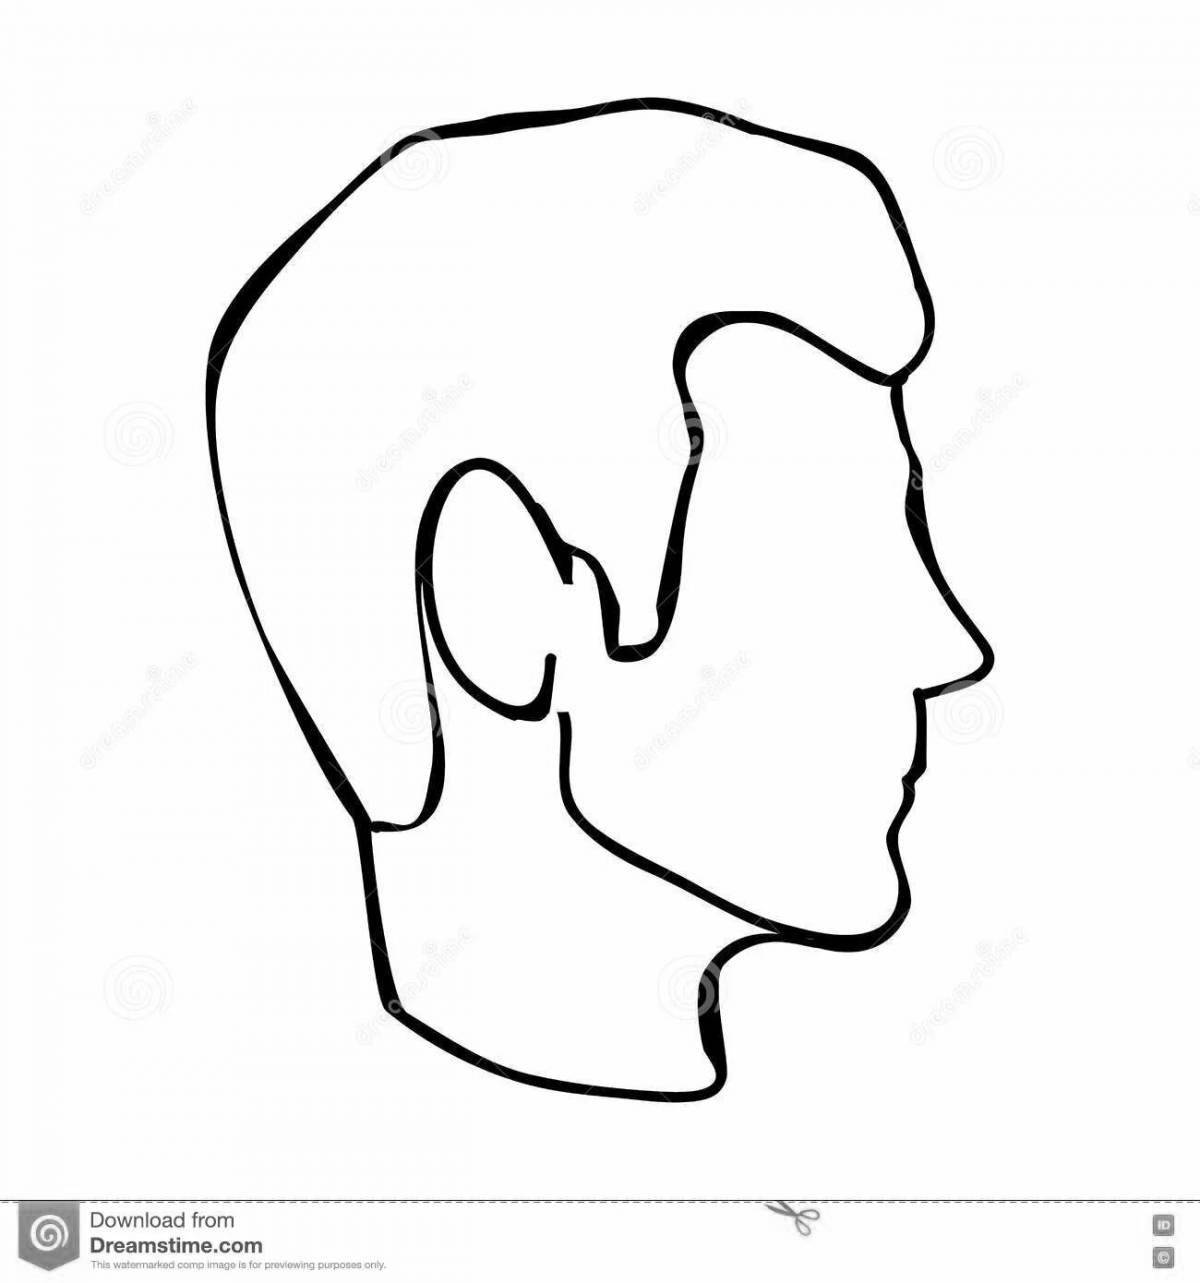 Coloring page of cheerful face profile